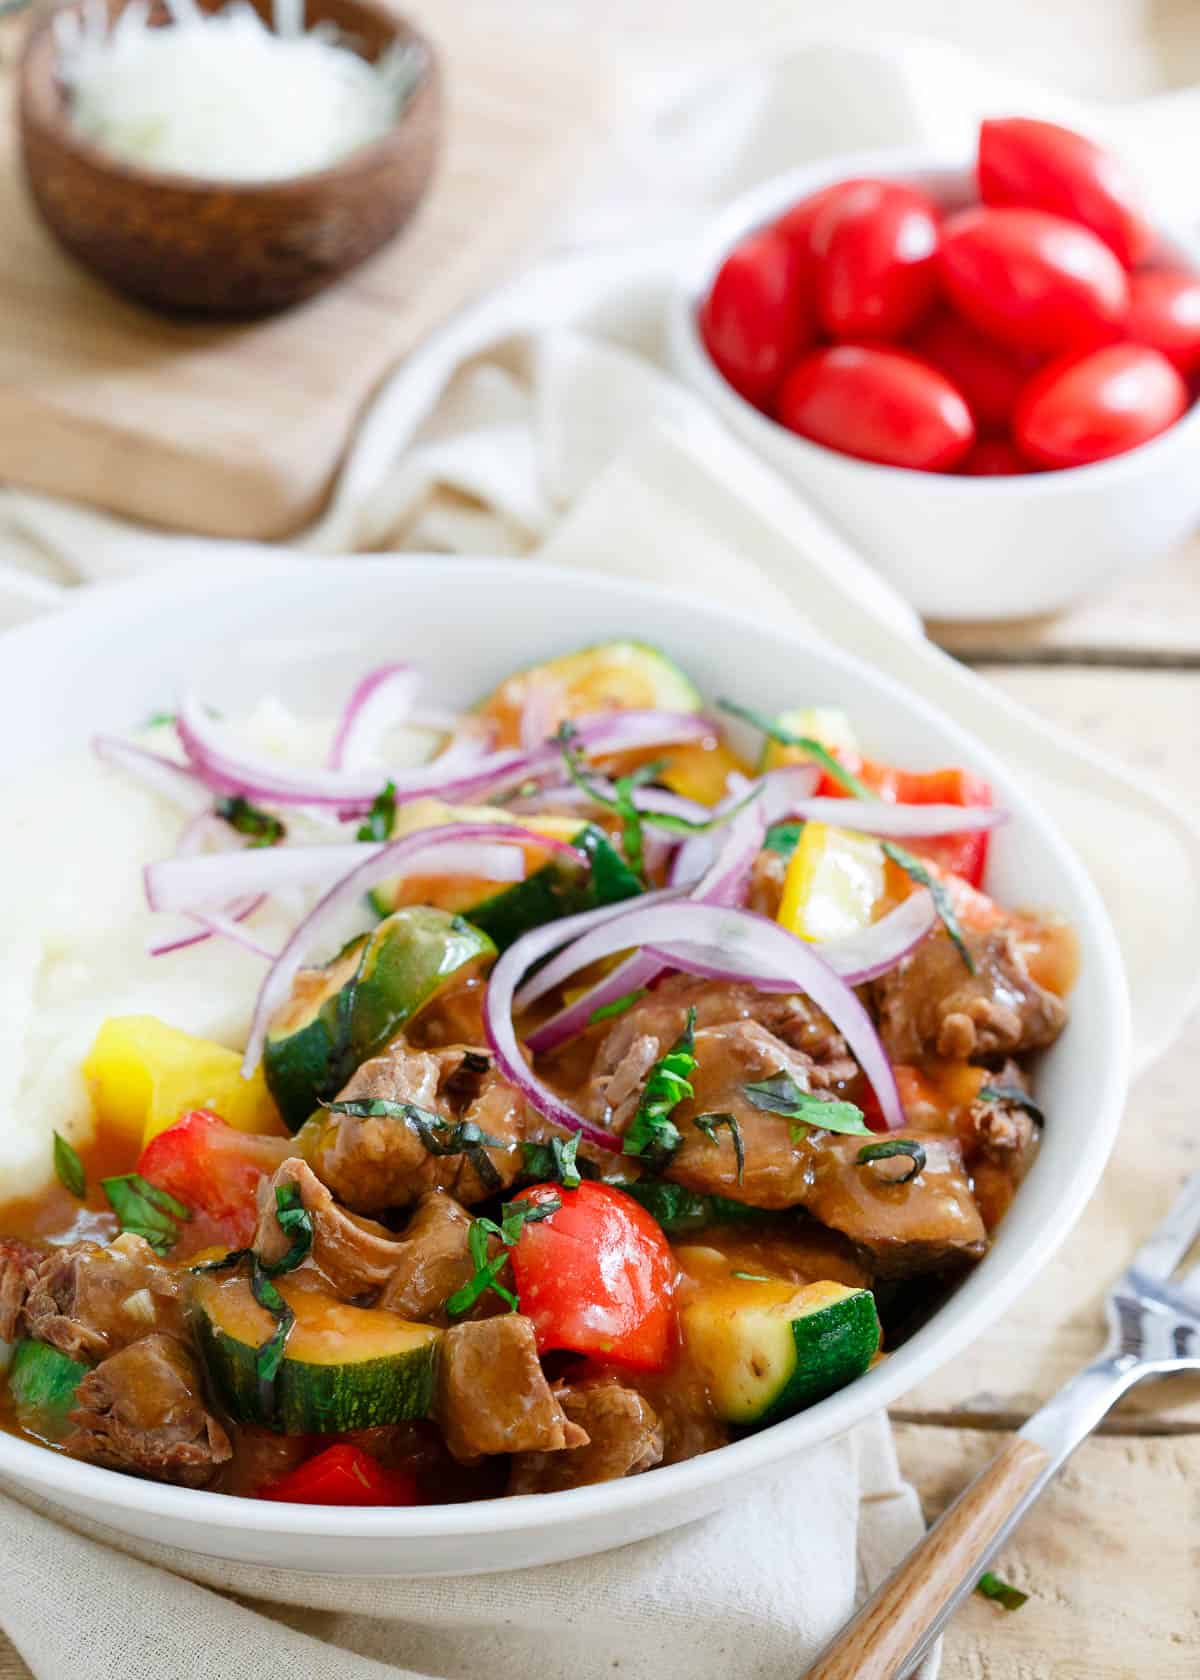 This summer beef stew is made in the slow cooker so the house stays cool. Enjoy this classic dish with a summer vegetable twist!